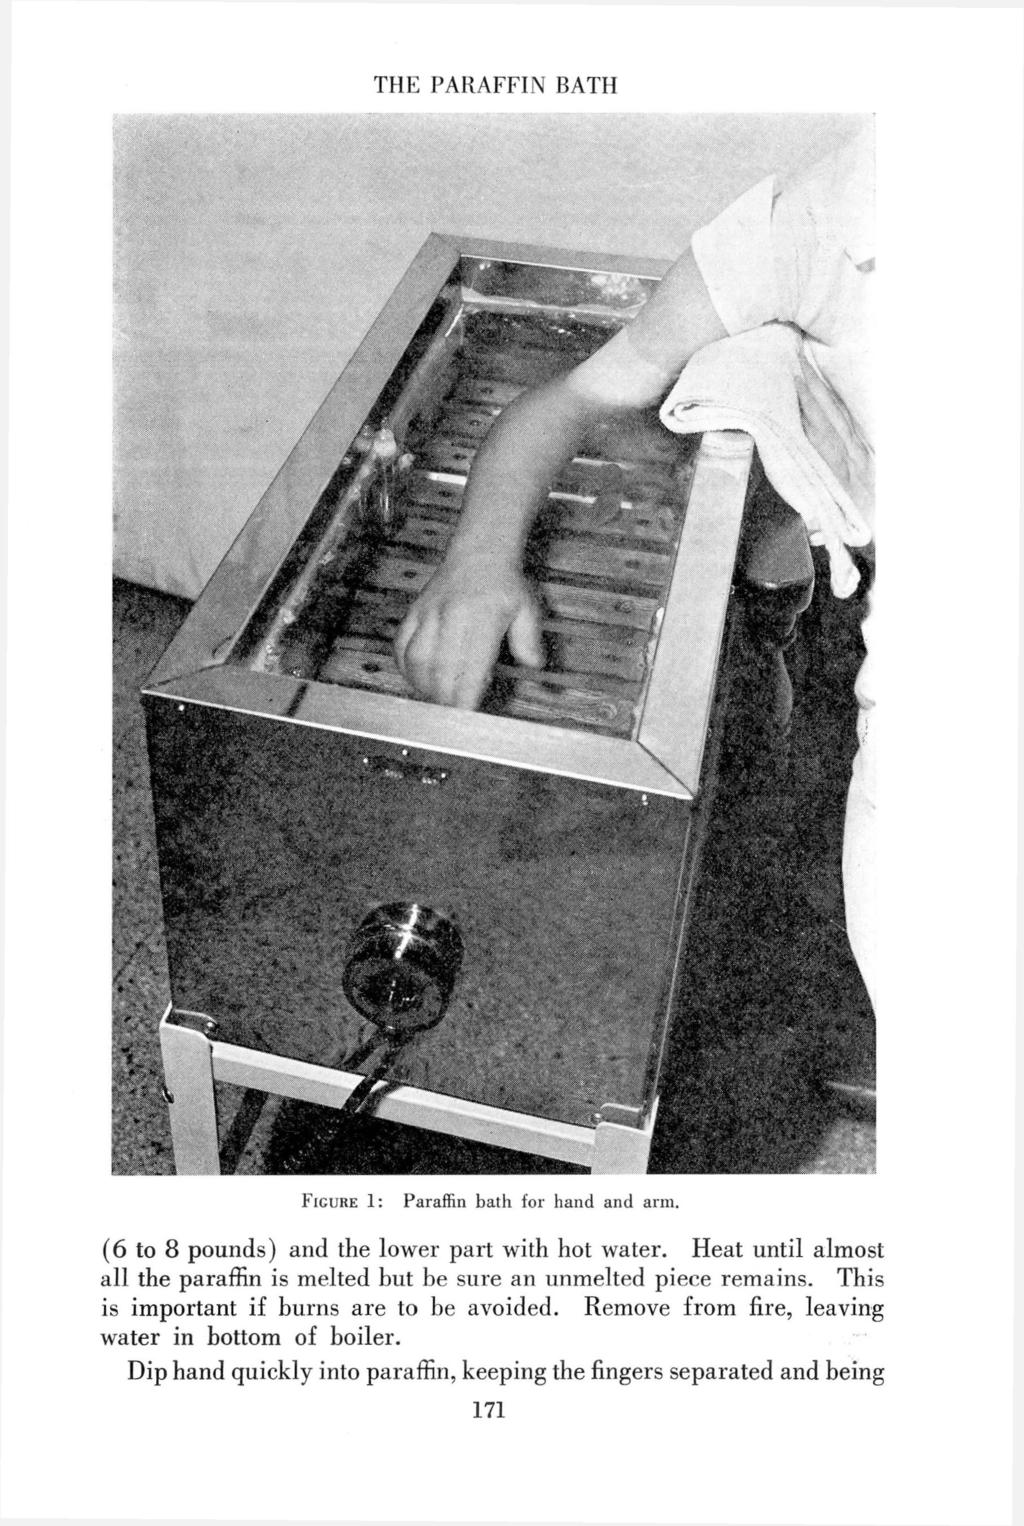 FIGURE 1: Paraffin bath for hand and arm. (6 to 8 pounds) and the lower part with hot water. Heat until almost all the paraffin is melted but be sure an unmelted piece remains.